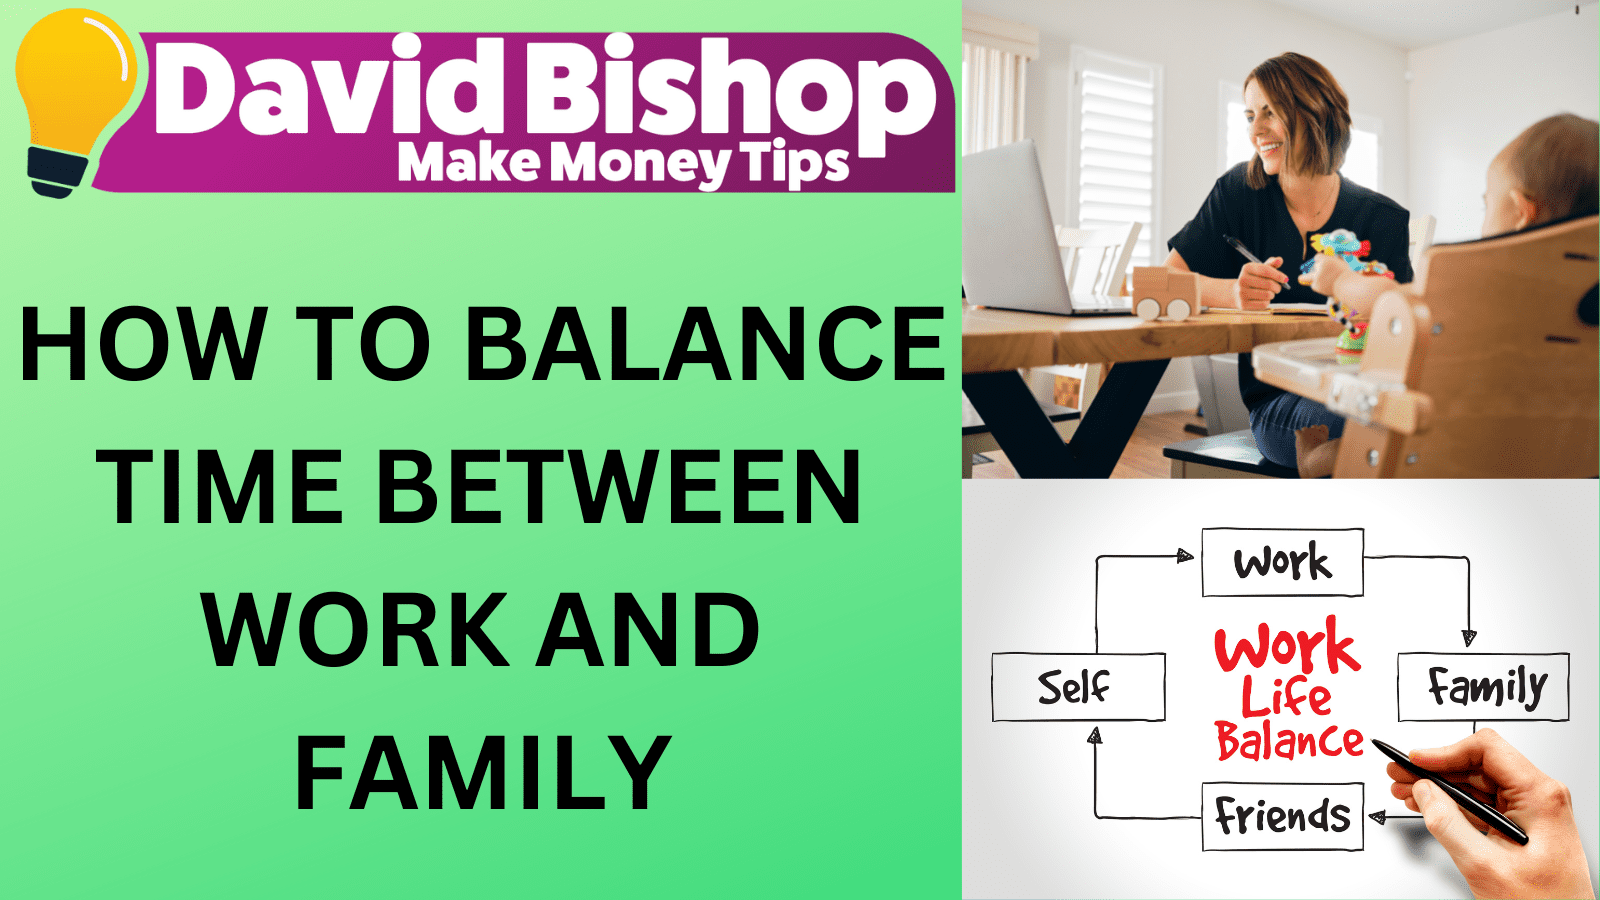 HOW TO BALANCE TIME BETWEEN WORK AND FAMILY